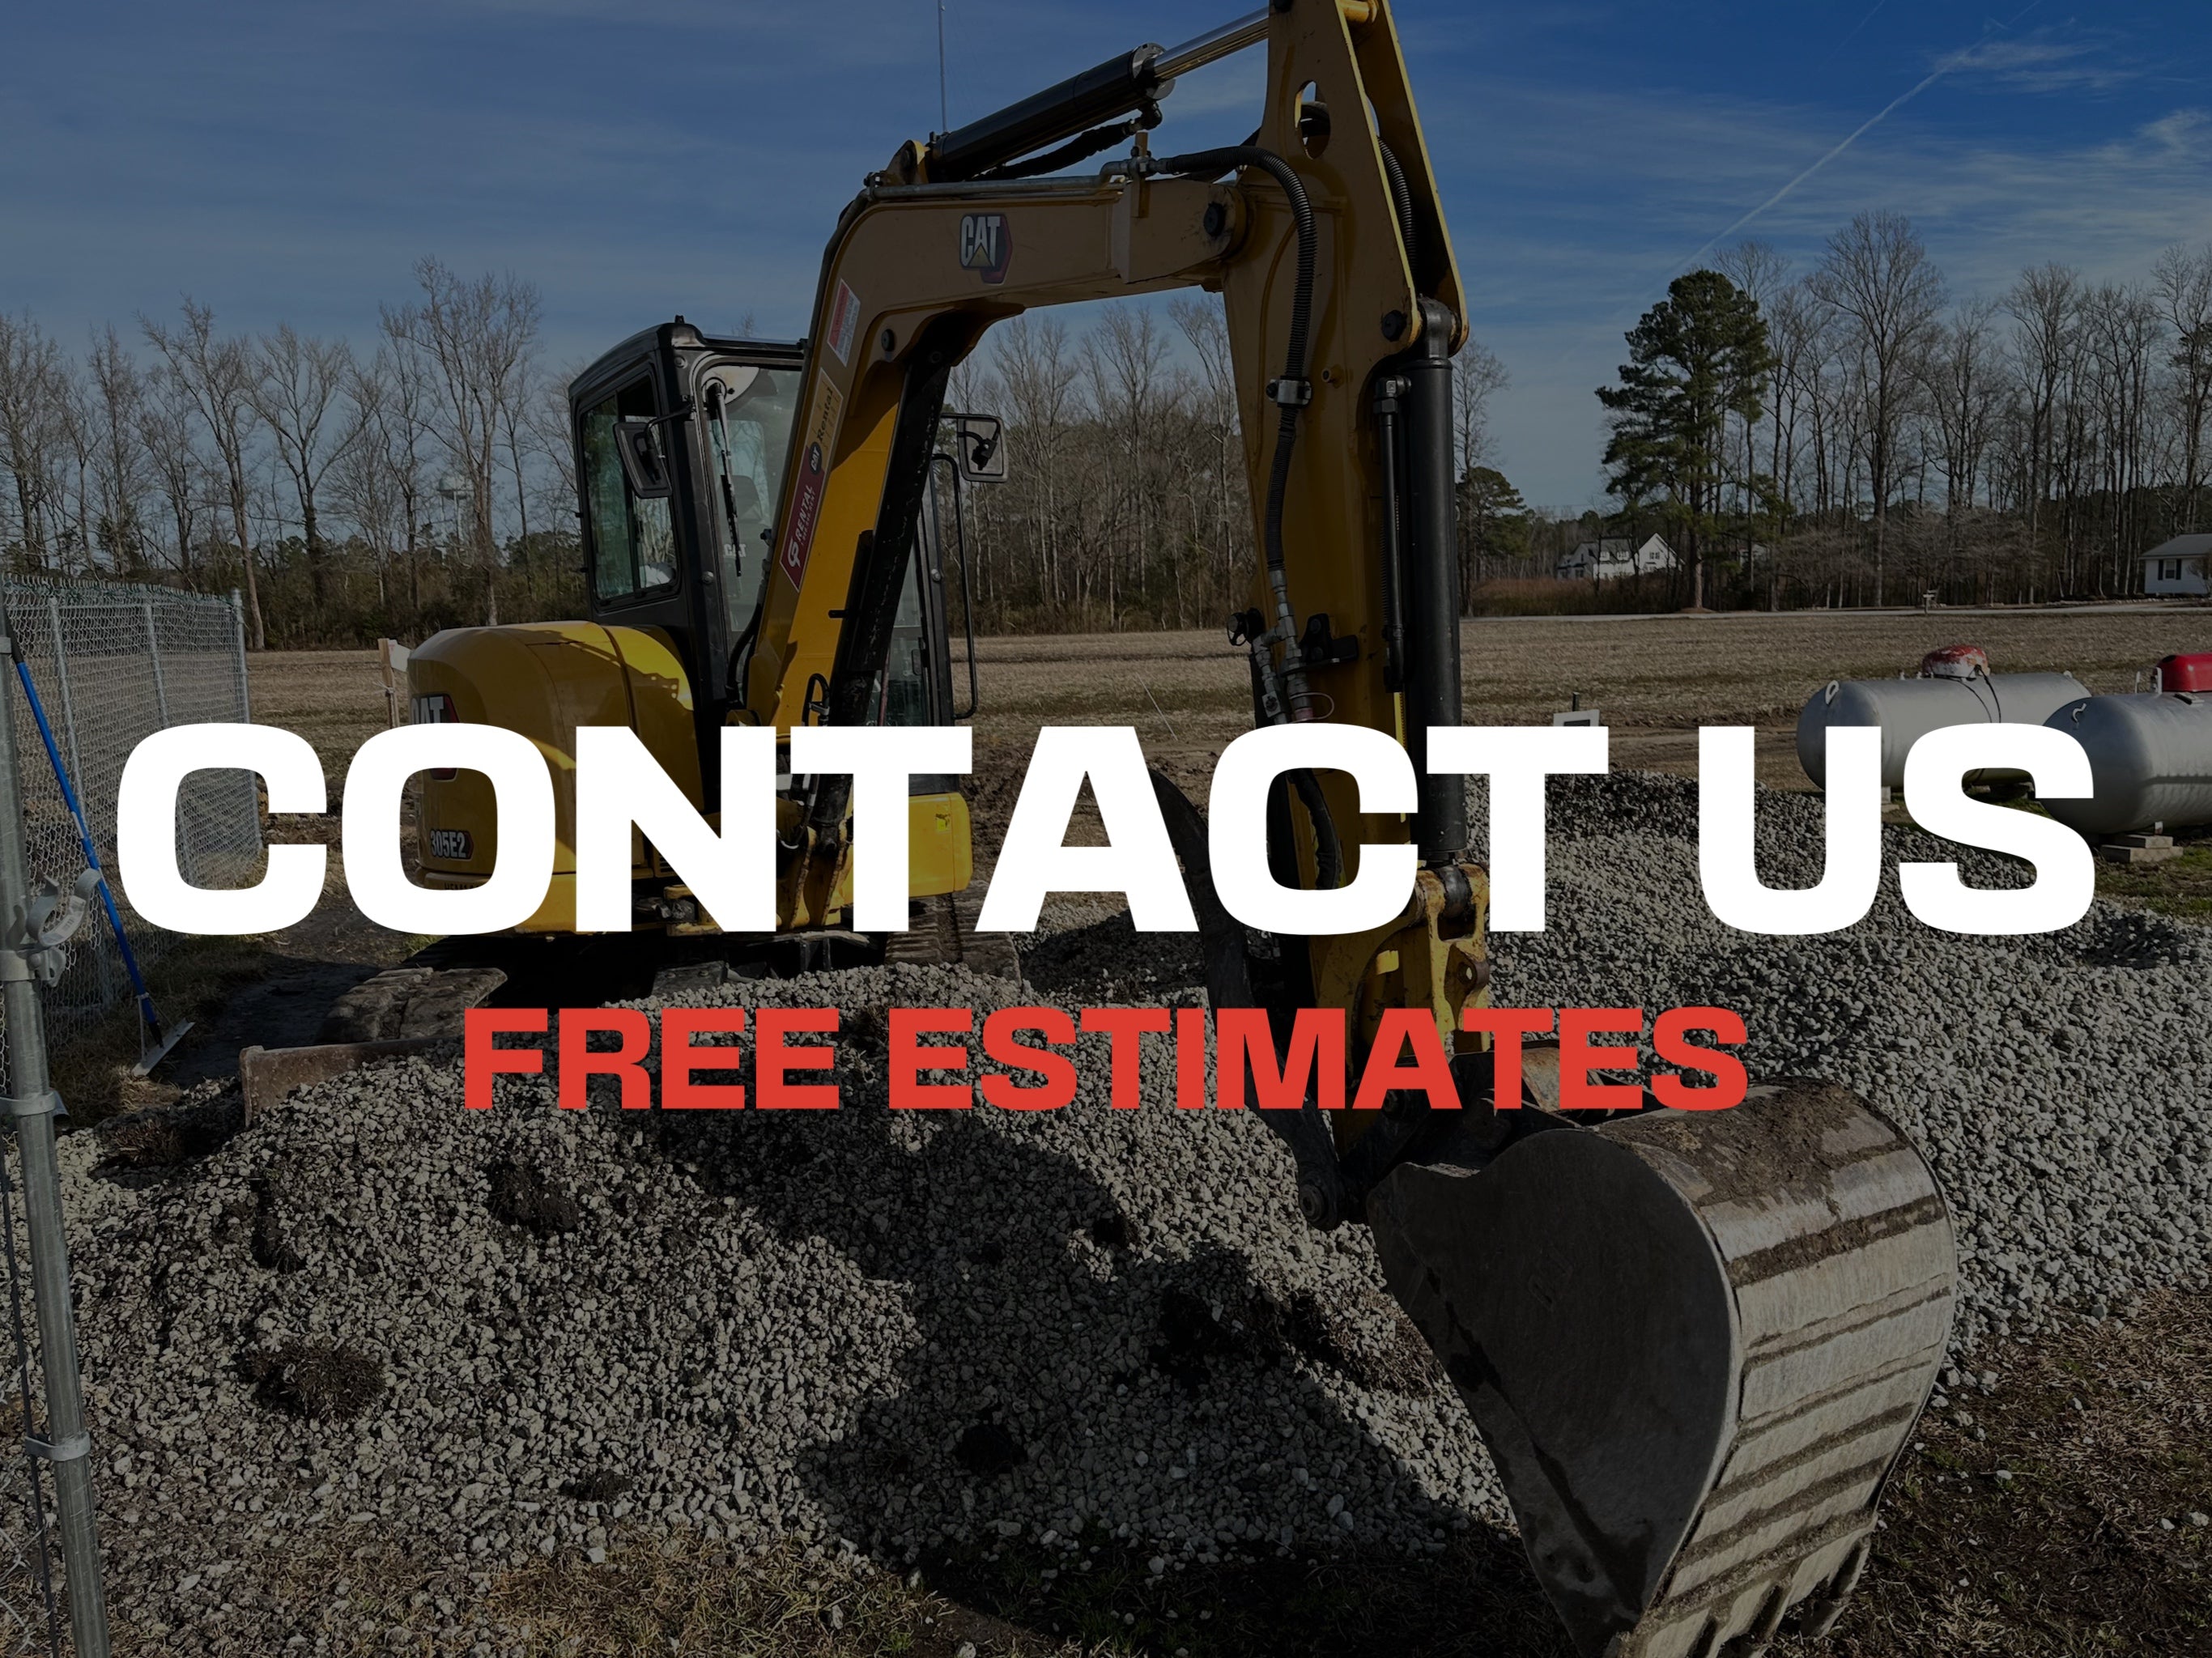 CONTACT CAROLINA EARTHWERX BY CALL OR TEXT TO 252-764-1364 FOR A FREE ESTIMATE ON YOUR NEXT PROJECT!